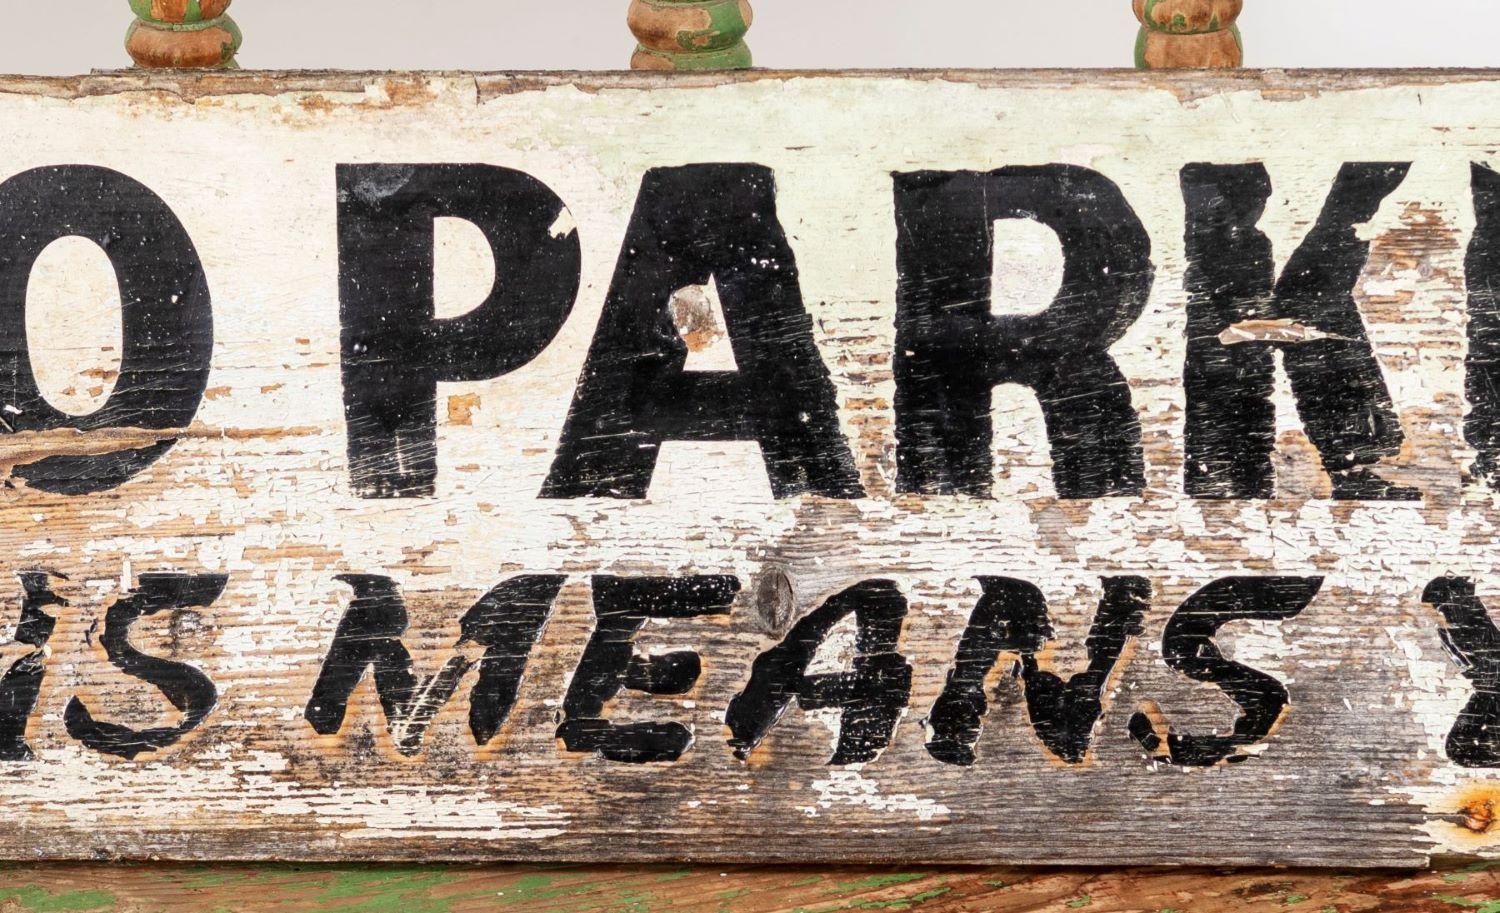 Folk Art Old Vintage Fun Wooden Hand Painted Sign 'No Parking' Decorative Wall Shelf Art For Sale